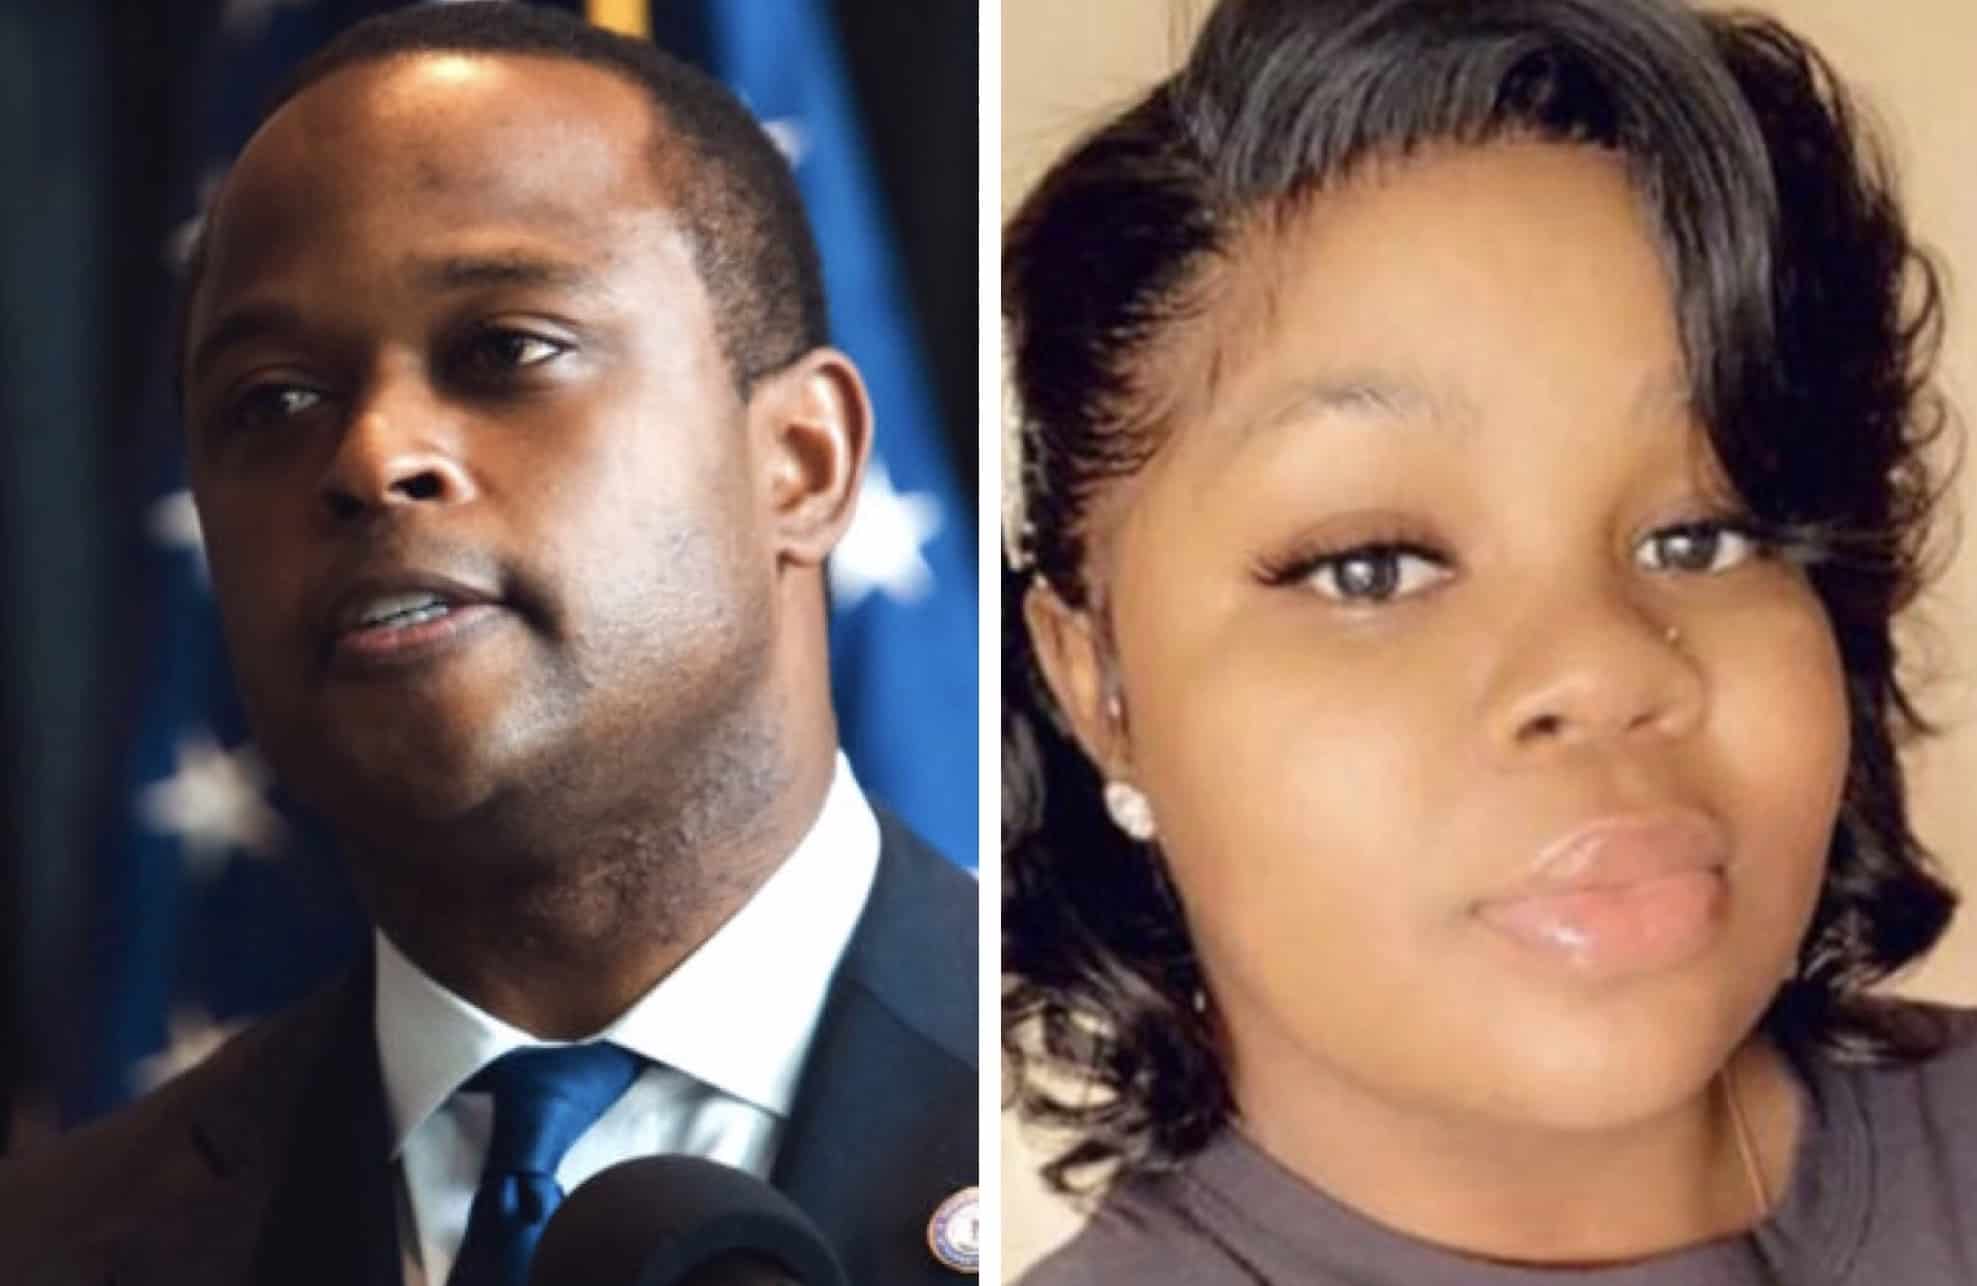 Three Grand Jurors In Breonna Taylor's Case File Petition To Impeach